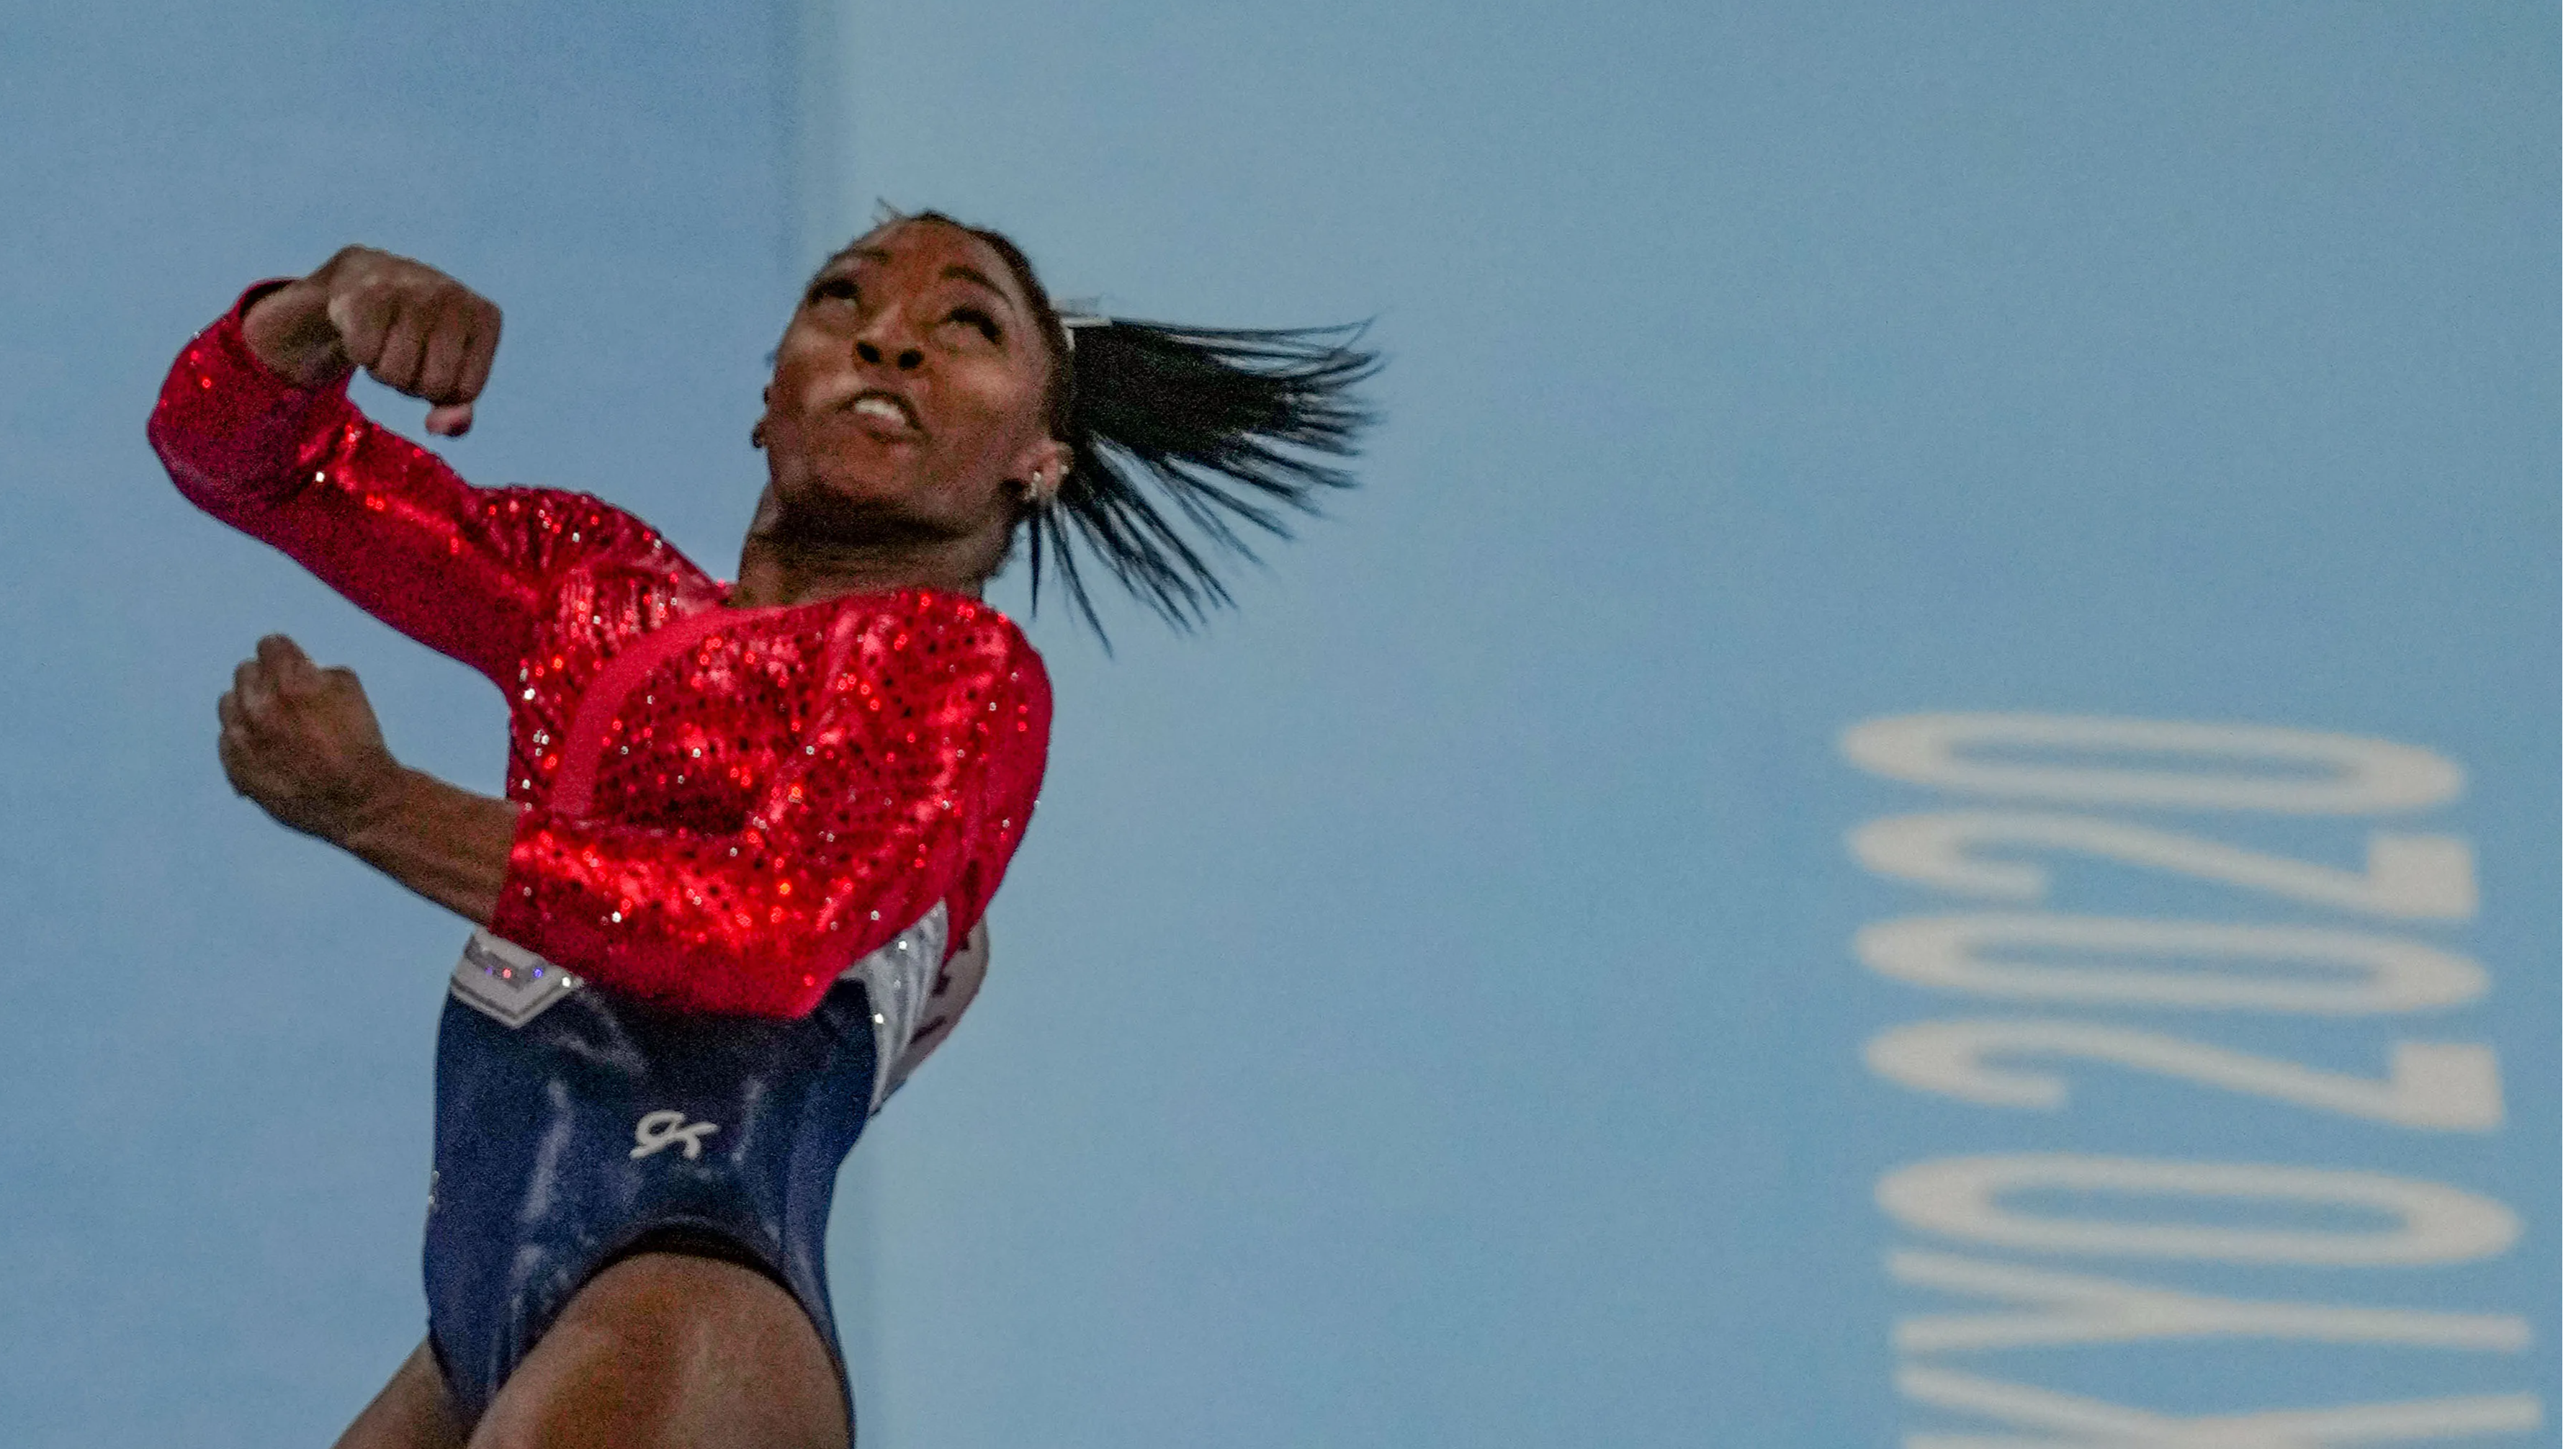 Tokyo Olympics: Simone Biles to compete in balance beam final